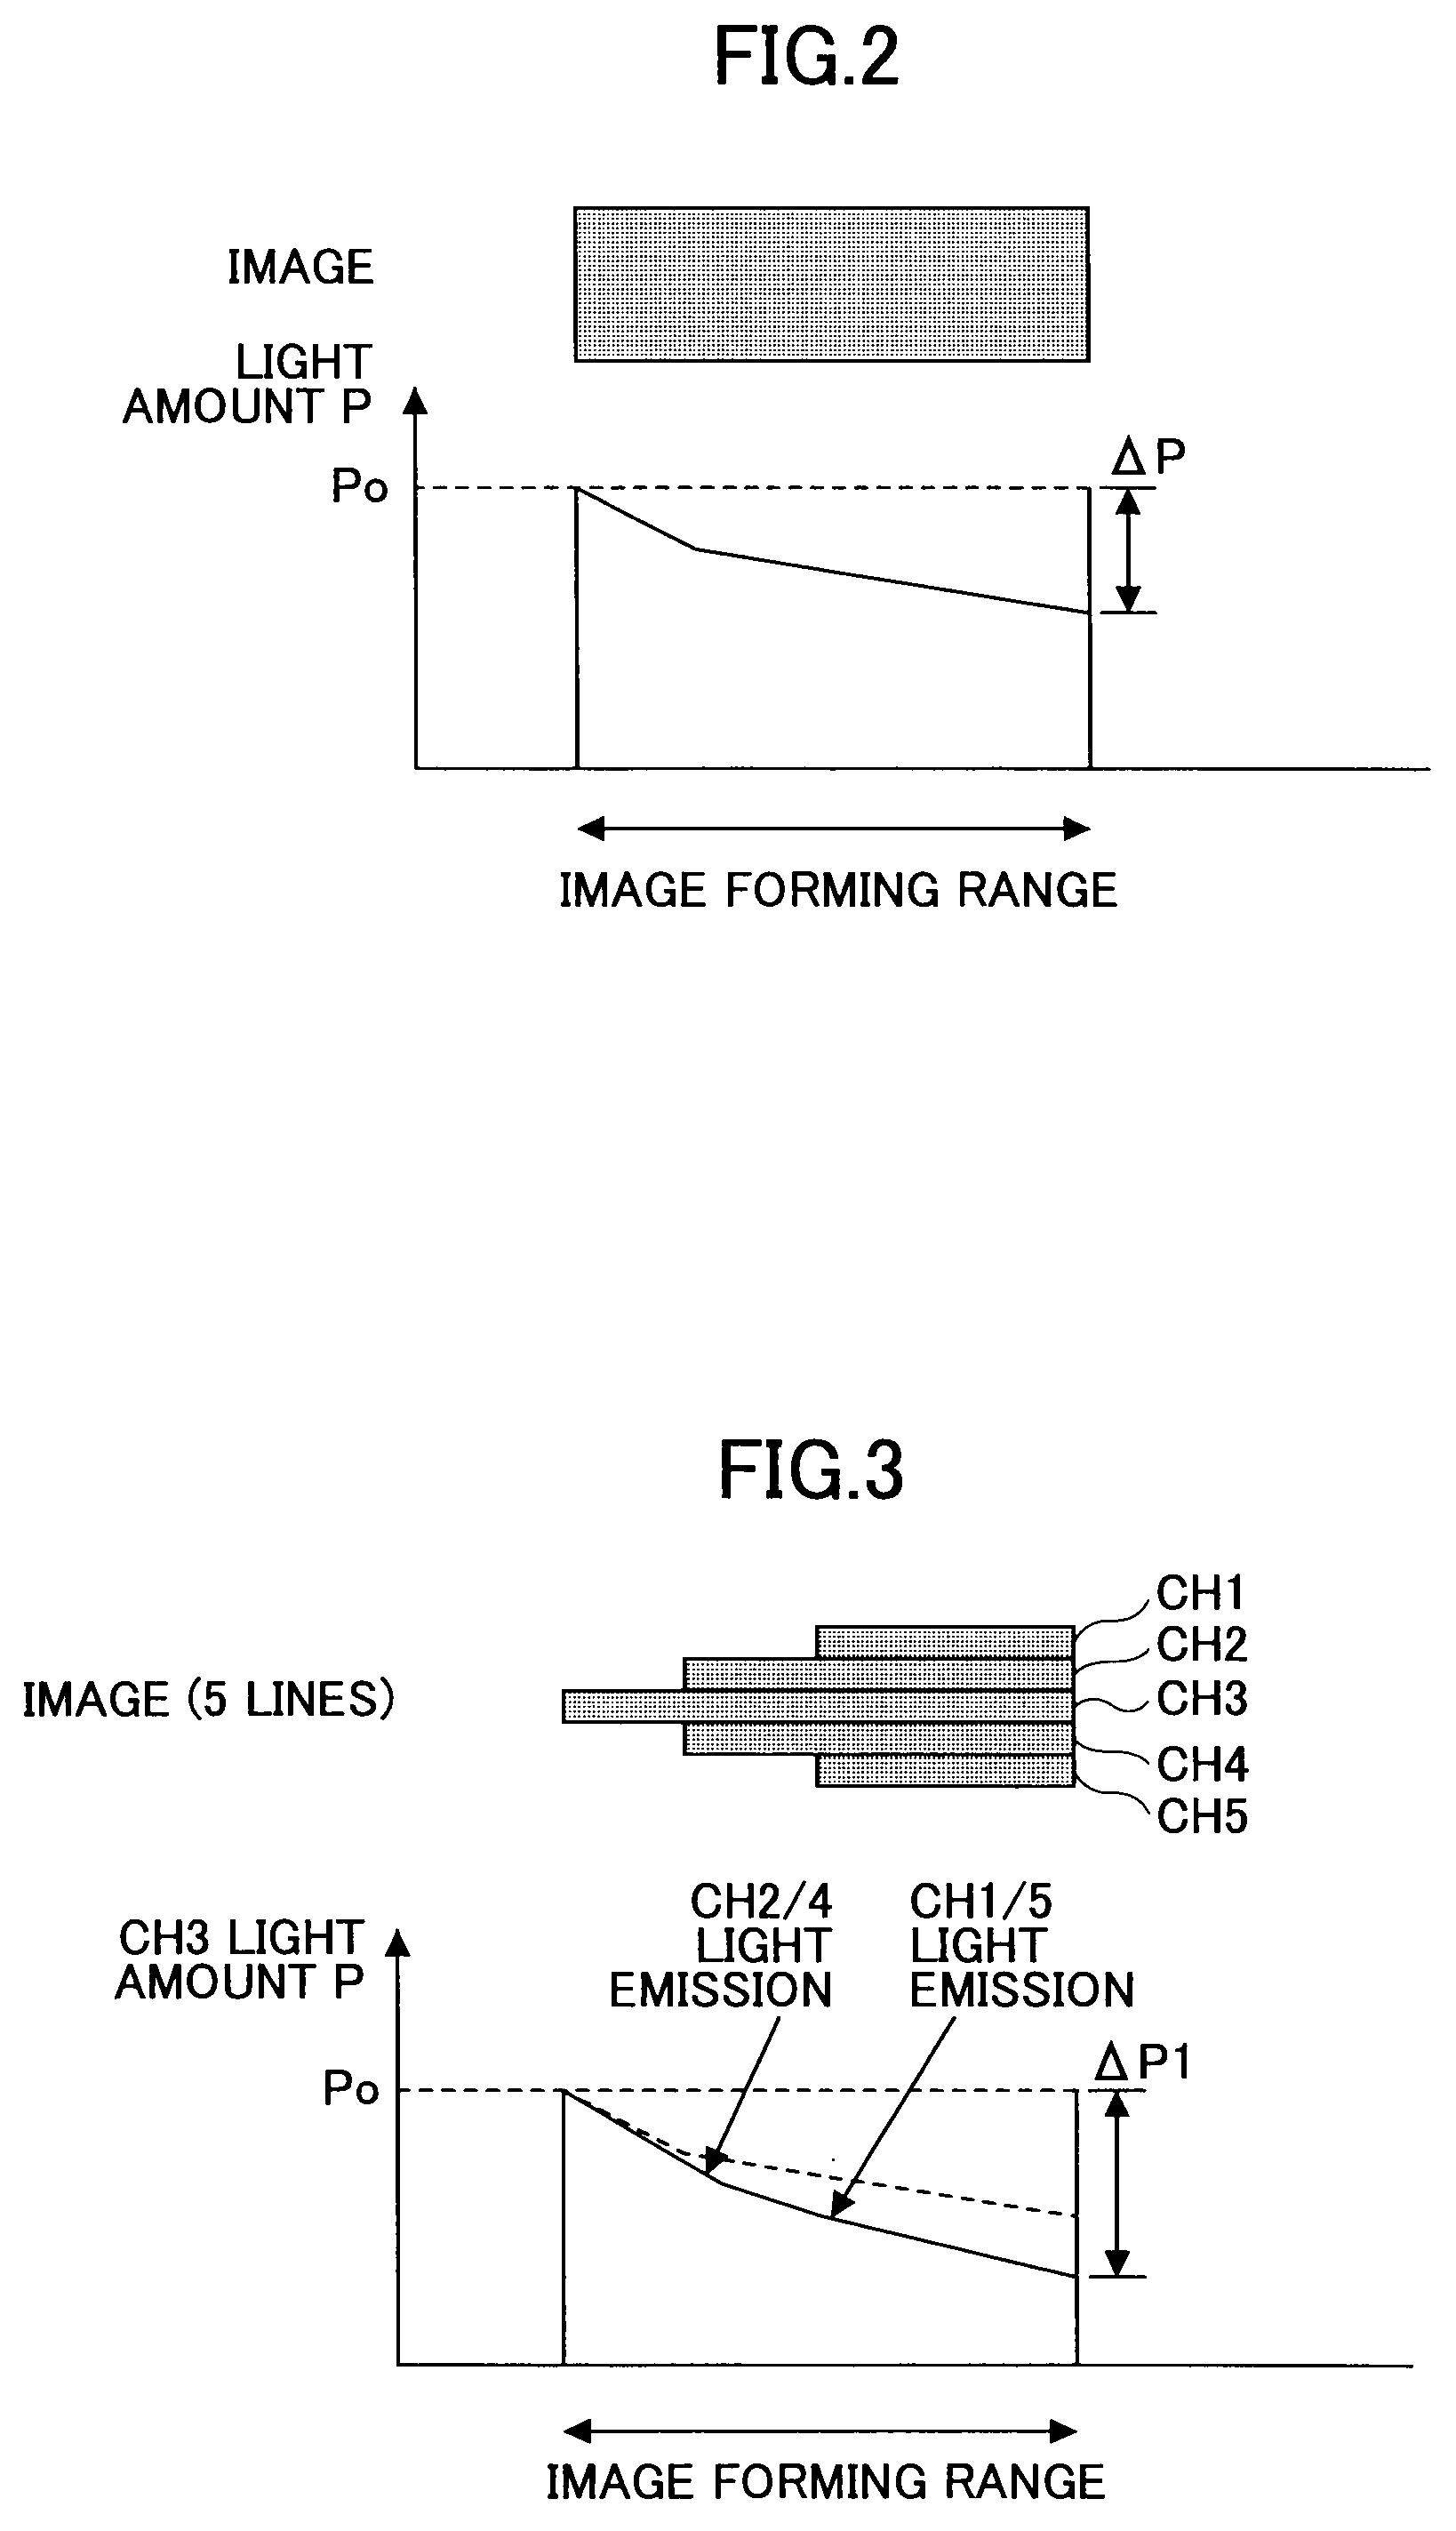 Multi-beam image forming apparatus configured to perform droop correction